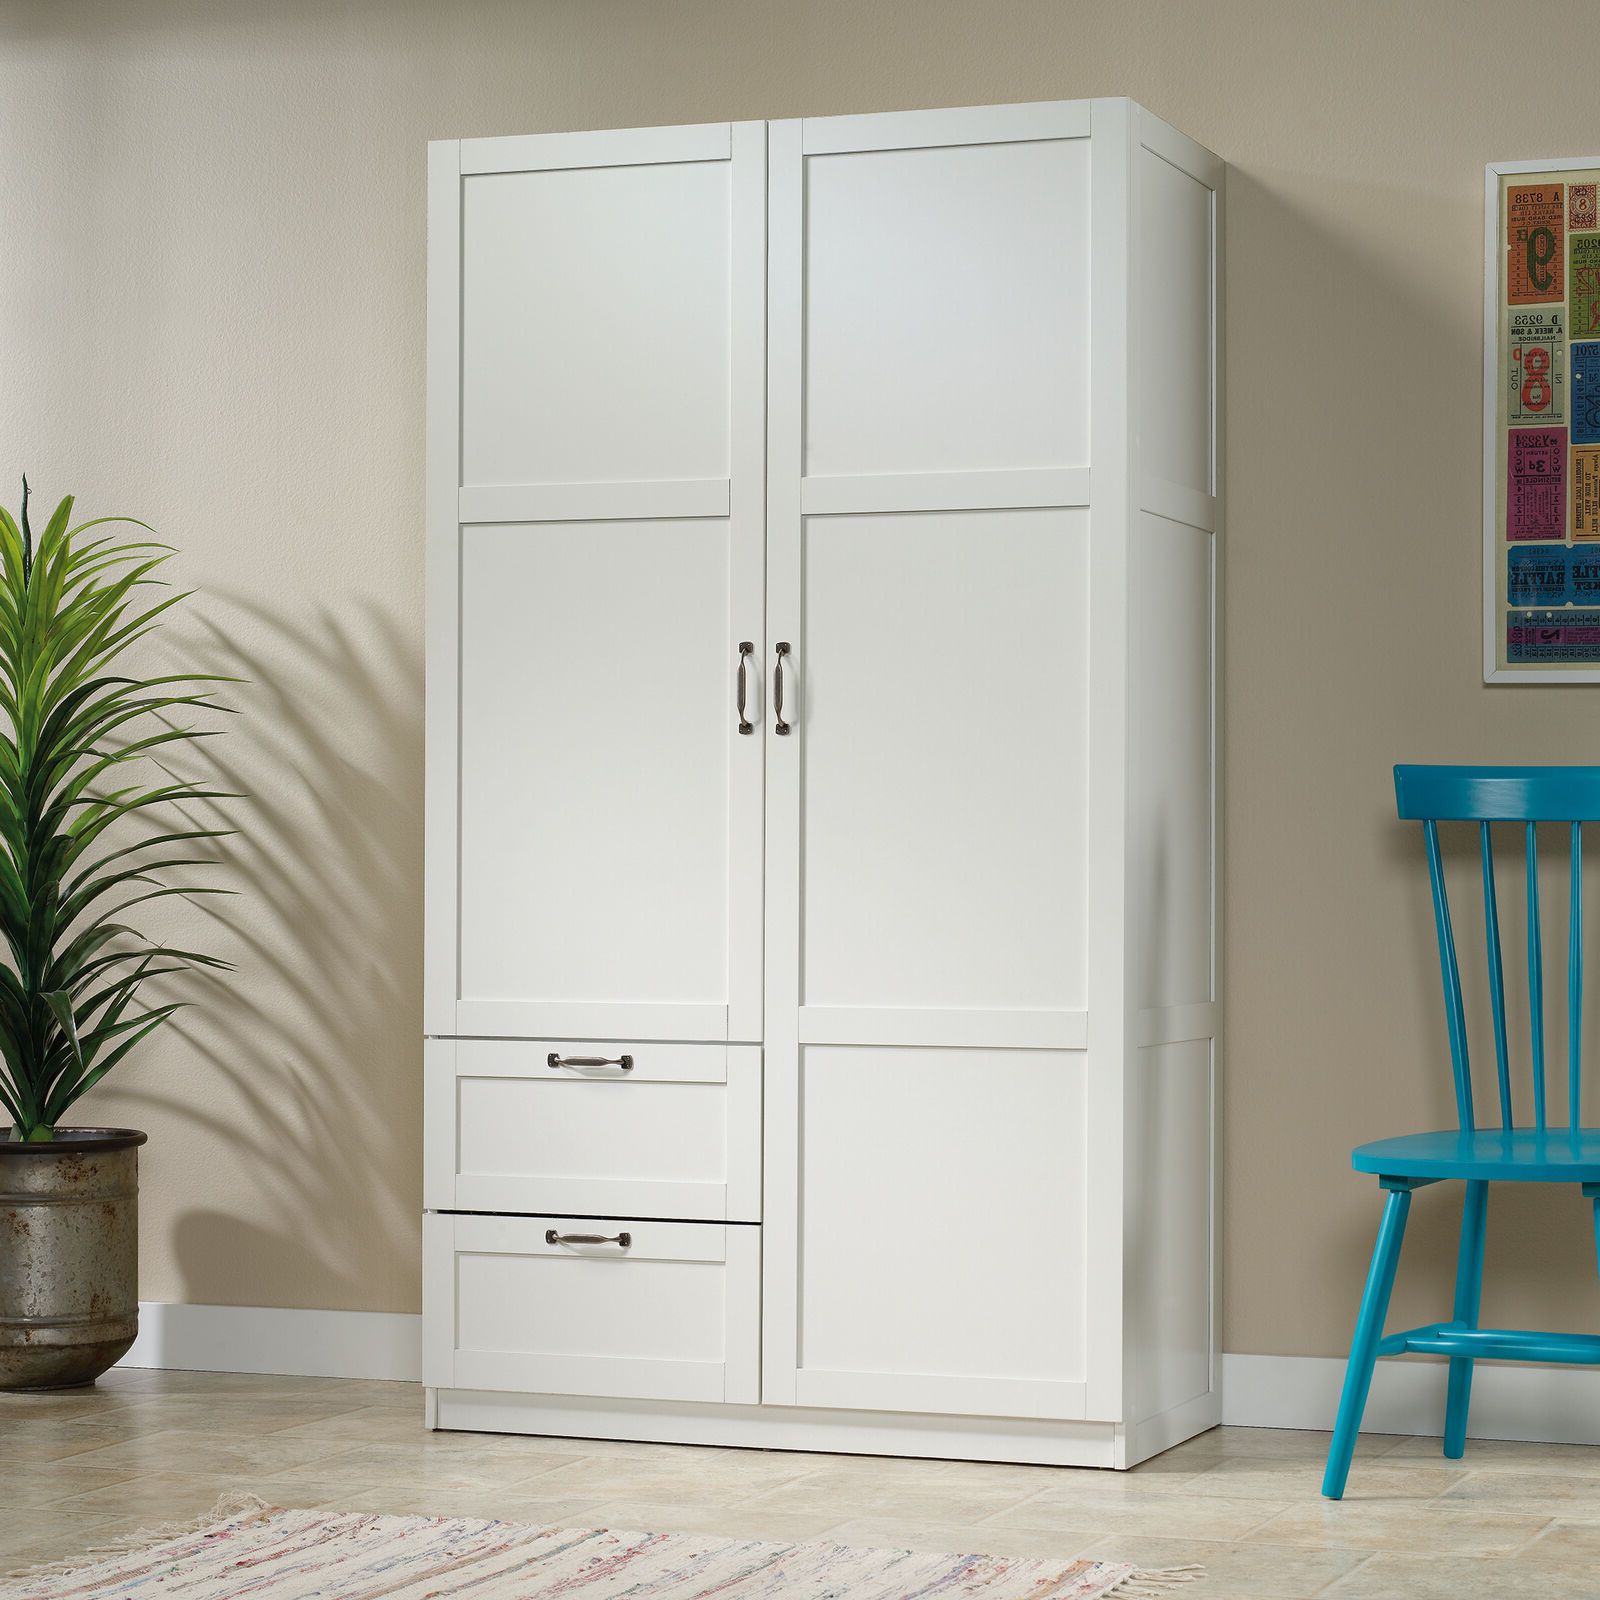 Modern 2 Door Wardrobe W/ Drawers Bedroom Armoire Clothes Storage Cabinet  White | Ebay Pertaining To Garment Cabinet Wardrobes (Gallery 20 of 20)